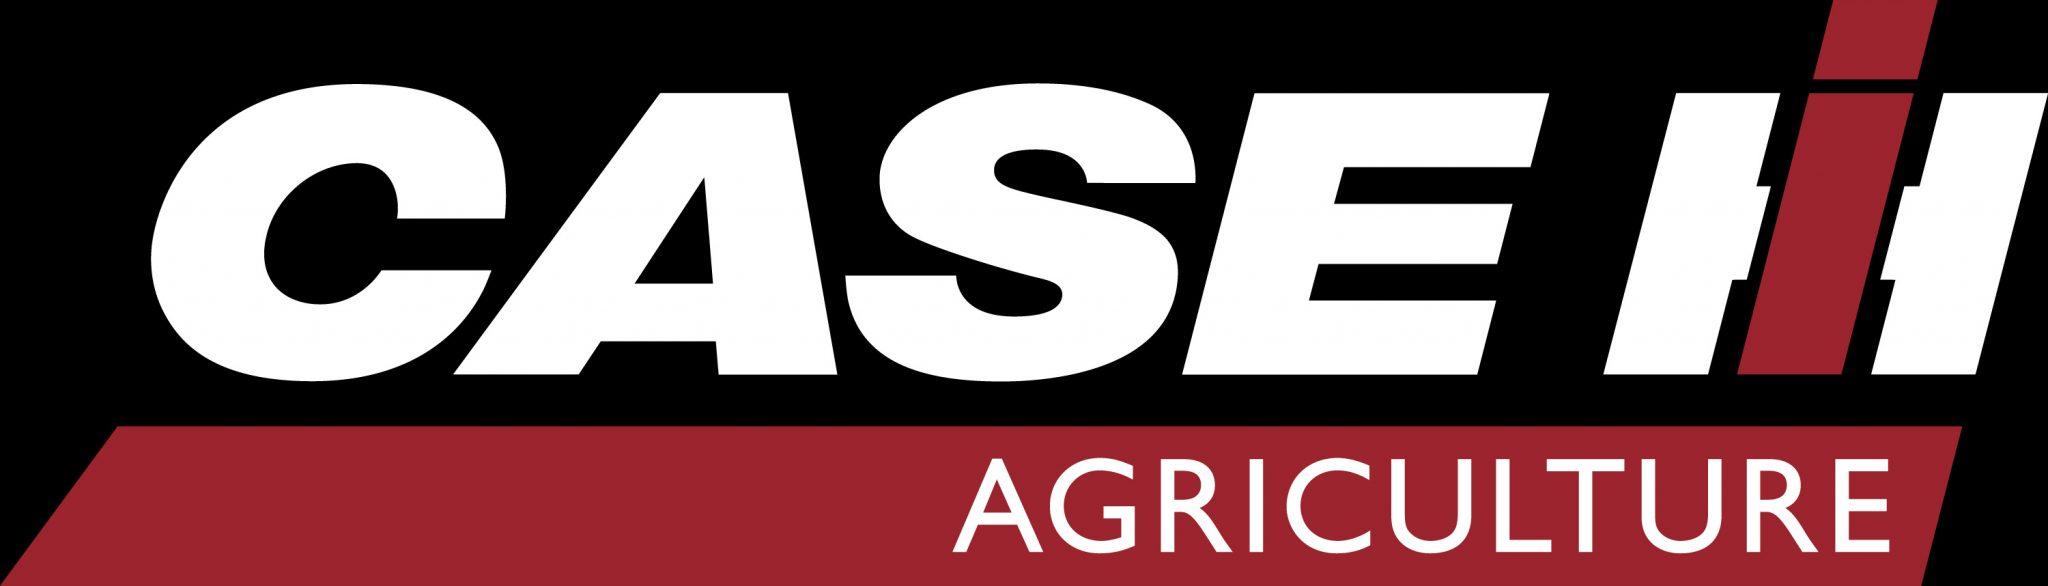 Case Agriculture Logo - Agriculture. Hartwigs. CASE IH. Balers, Combines, Headers Fronts